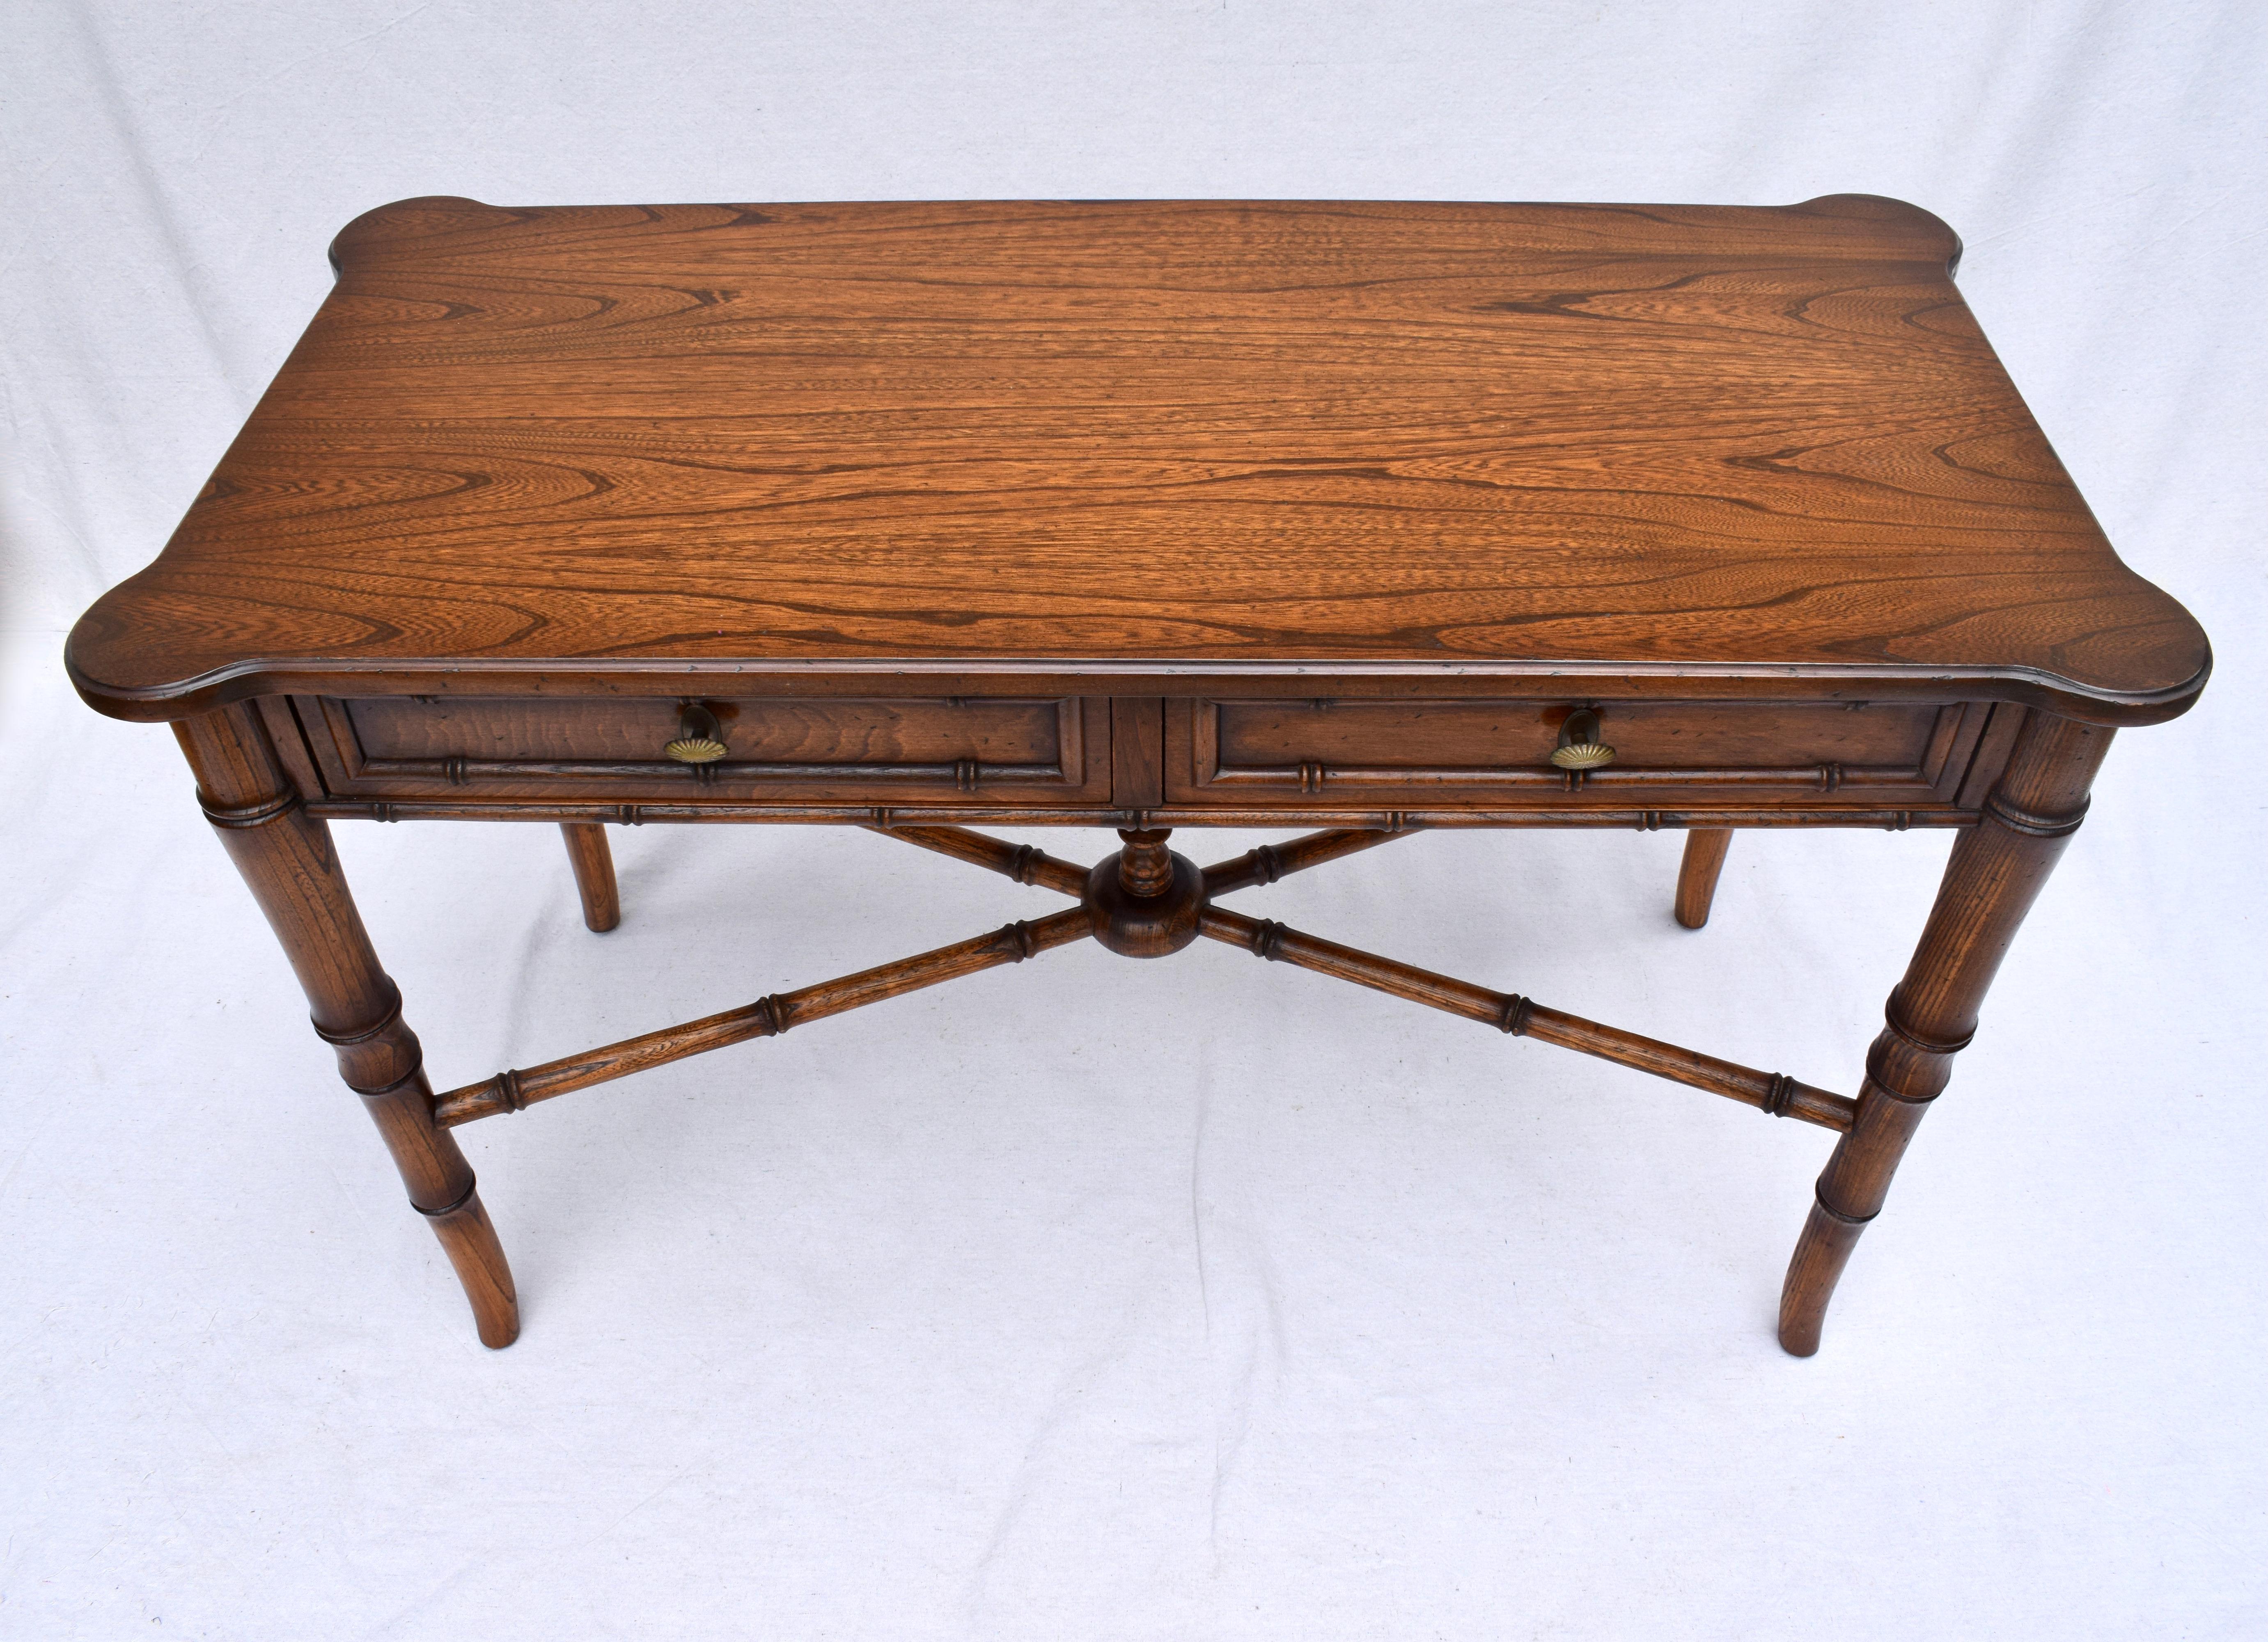 Exquisite two dovetailed drawer Regency style faux bamboo solid Oak writing desk with X stretcher base & finial. Early 20th c. attributed to Baker Furniture. Heirloom quality in pristine condition.